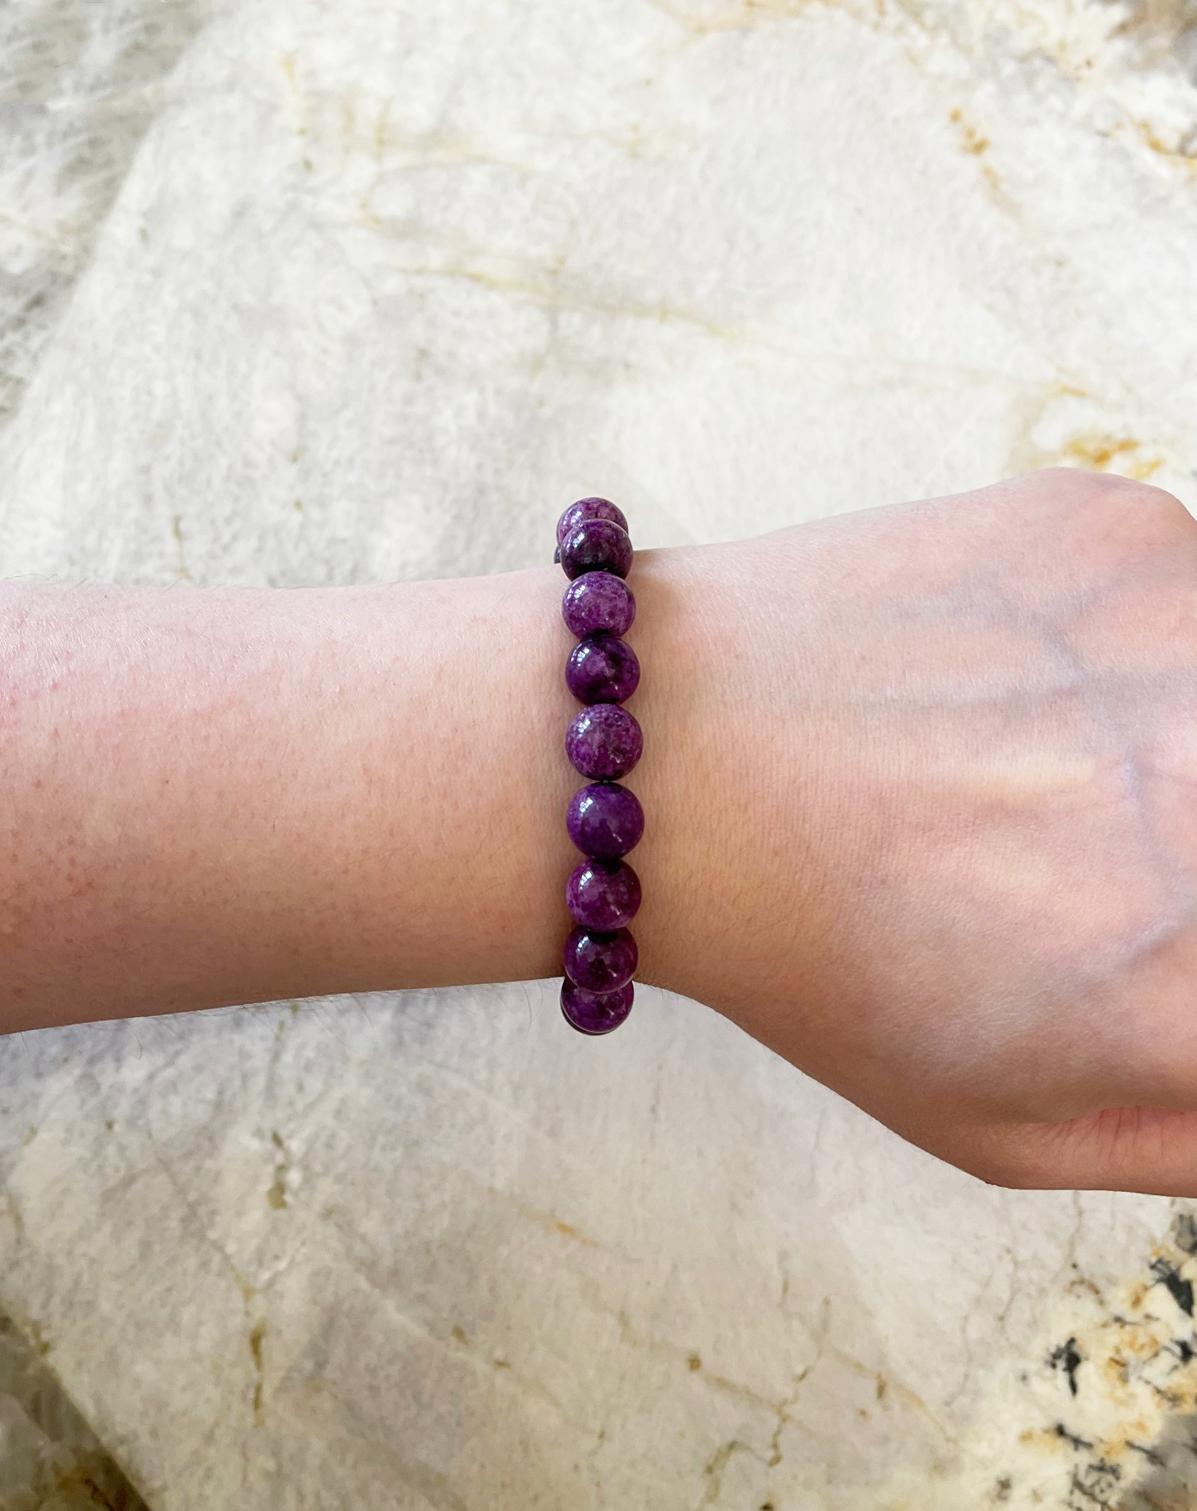 An elegant and striking stretch stacking bracelet made with top quality and very rare purple stichtite round beads (10mm). Handcrafted in the USA by Rocat Designs. These stichtite beads are a beautiful vibrant purple color. The bracelet measures